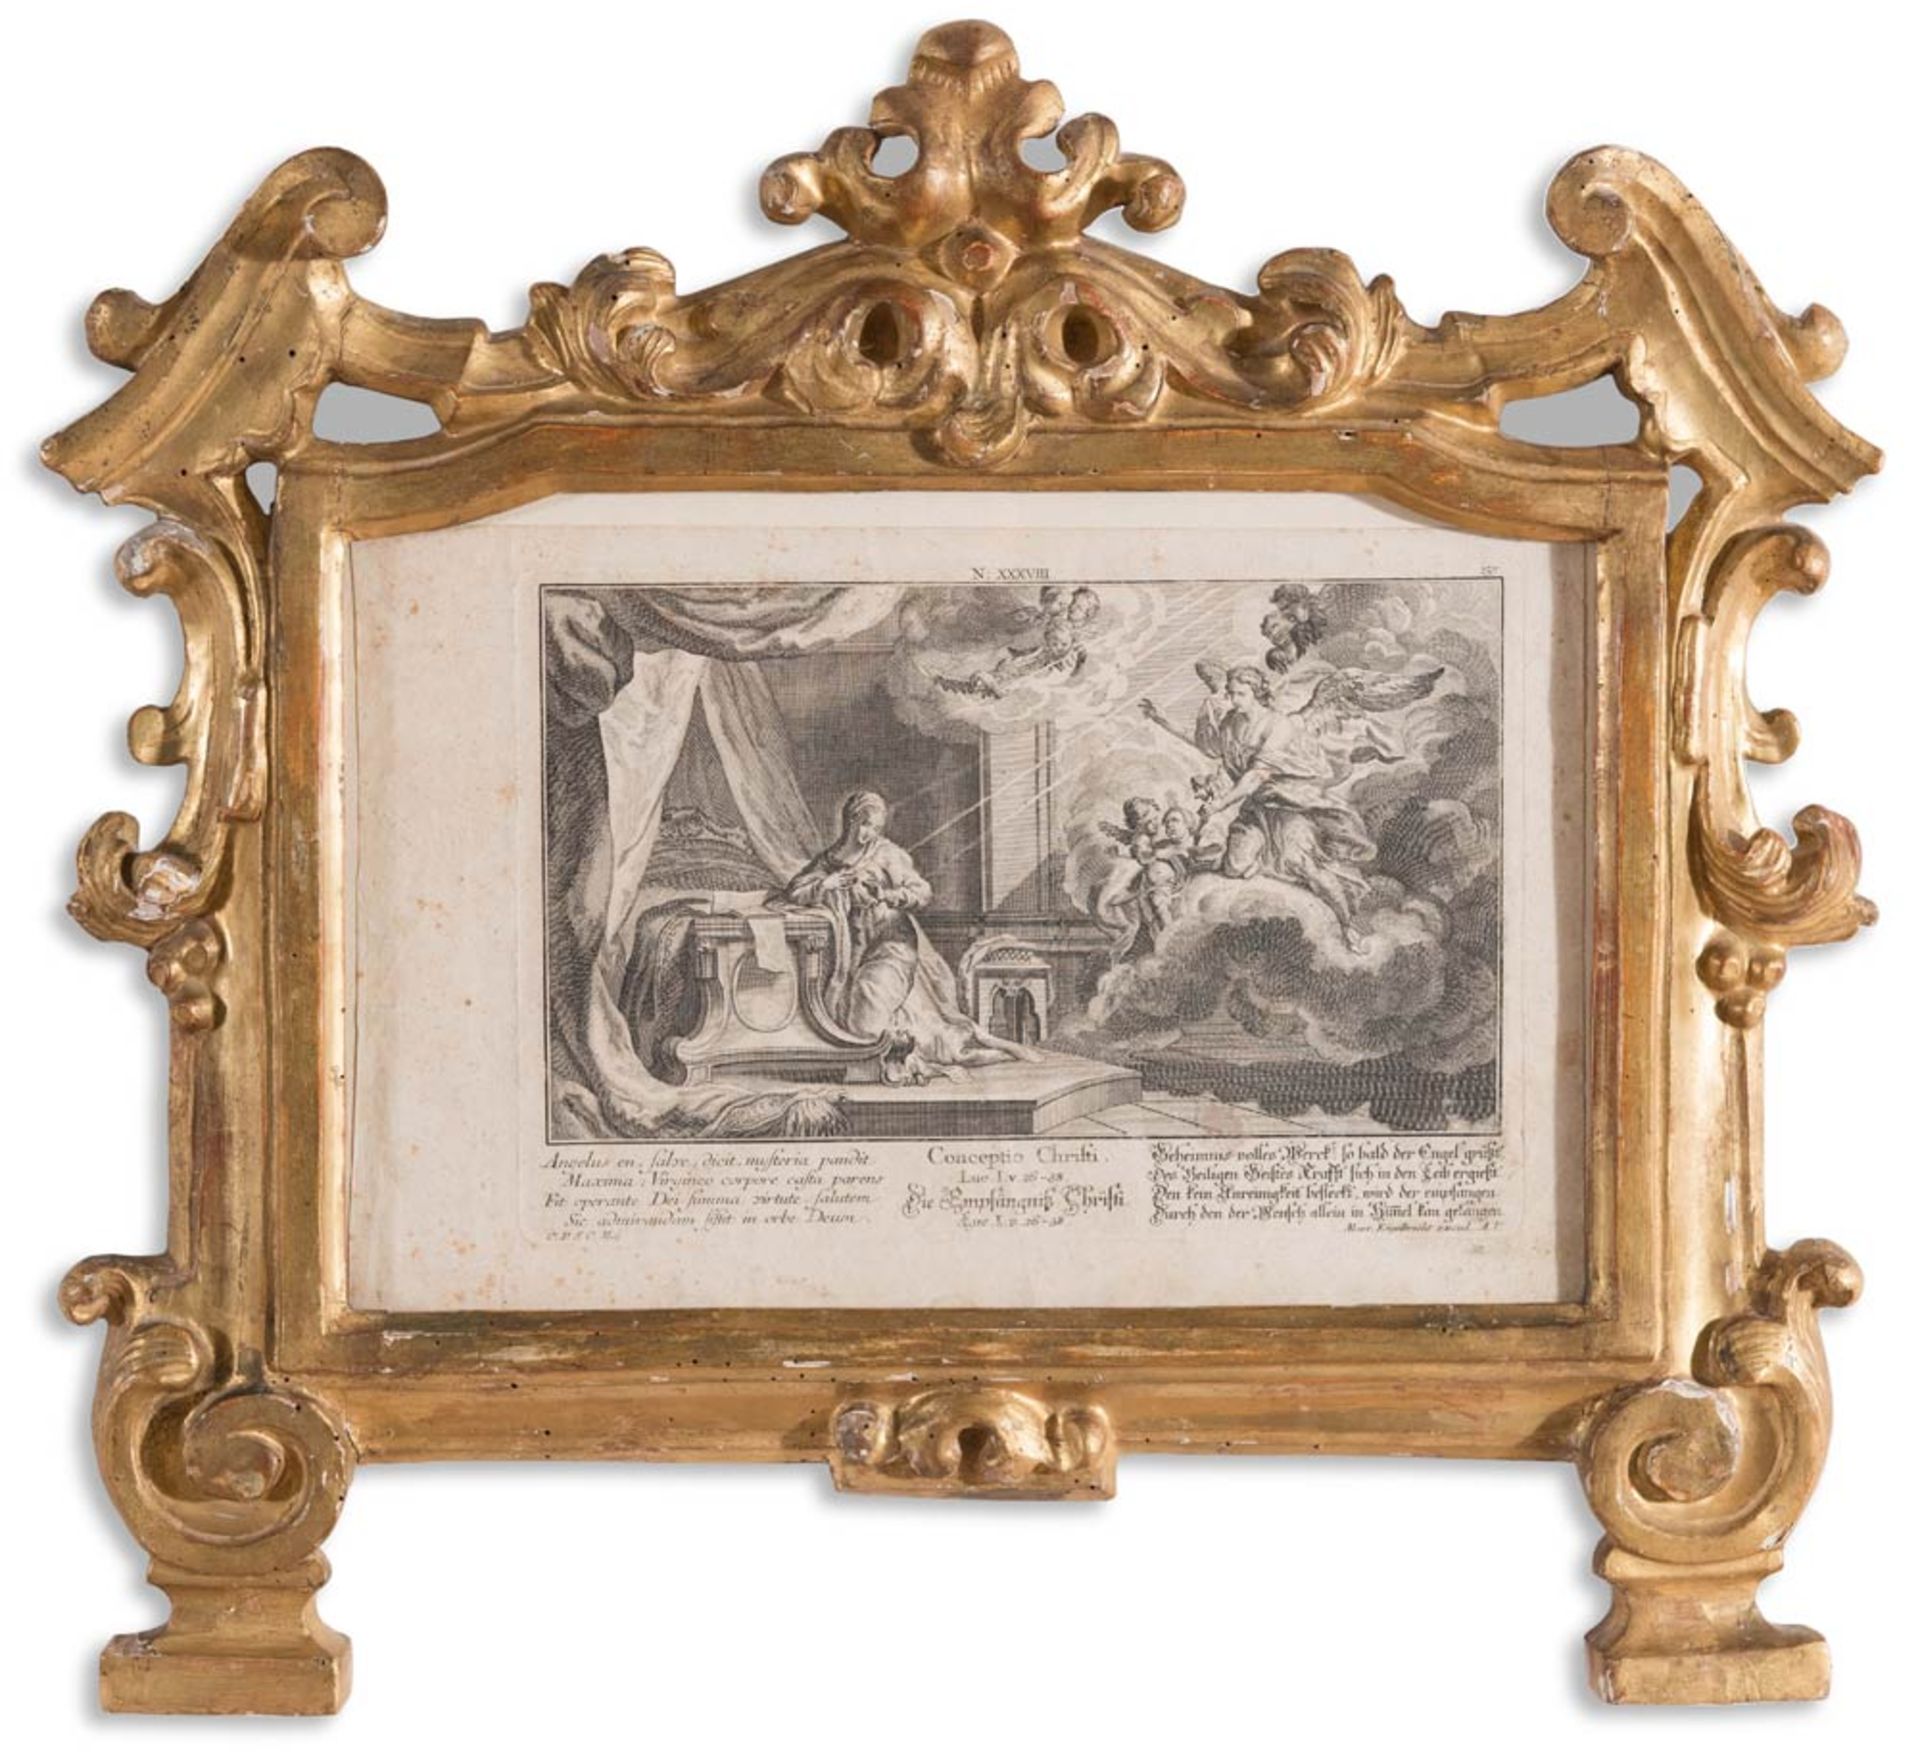 Carved and gilt wood frame, 18th Century.